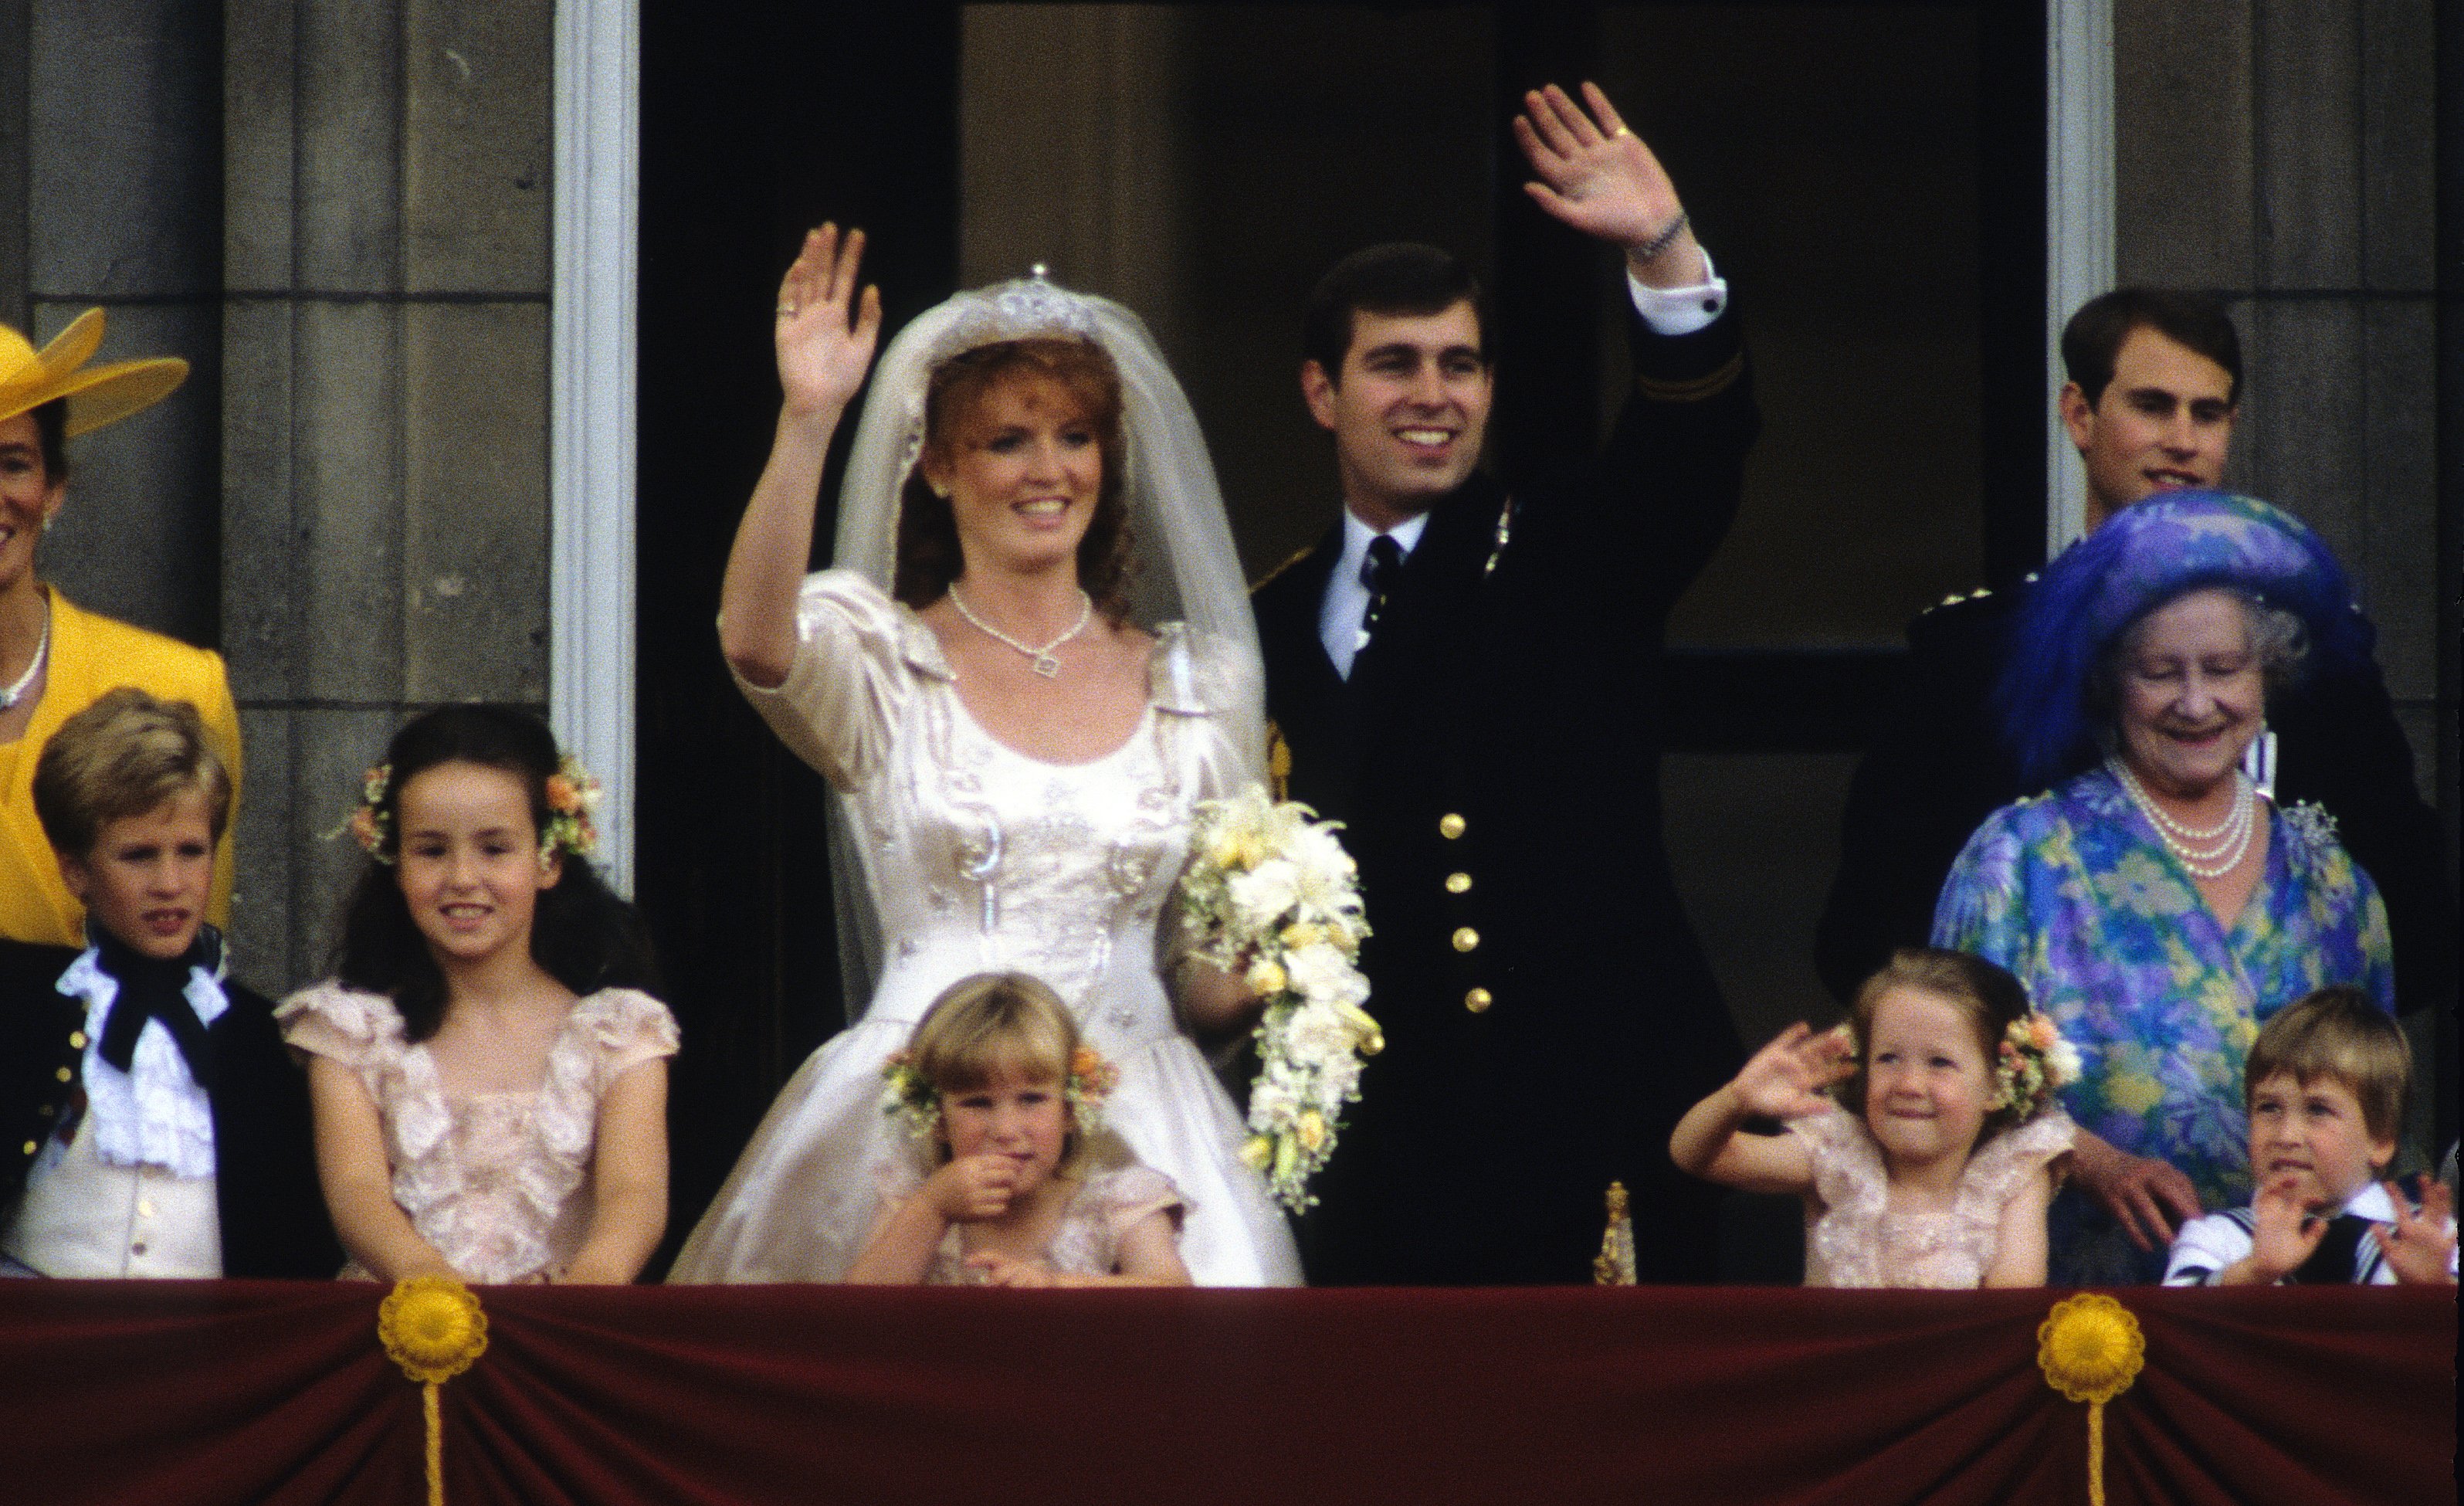  Sarah Ferguson, Duchess of York and Prince Andrew, Duke of York on their wedding day on July 23, 1986, in London, England. | Source: Getty Images.